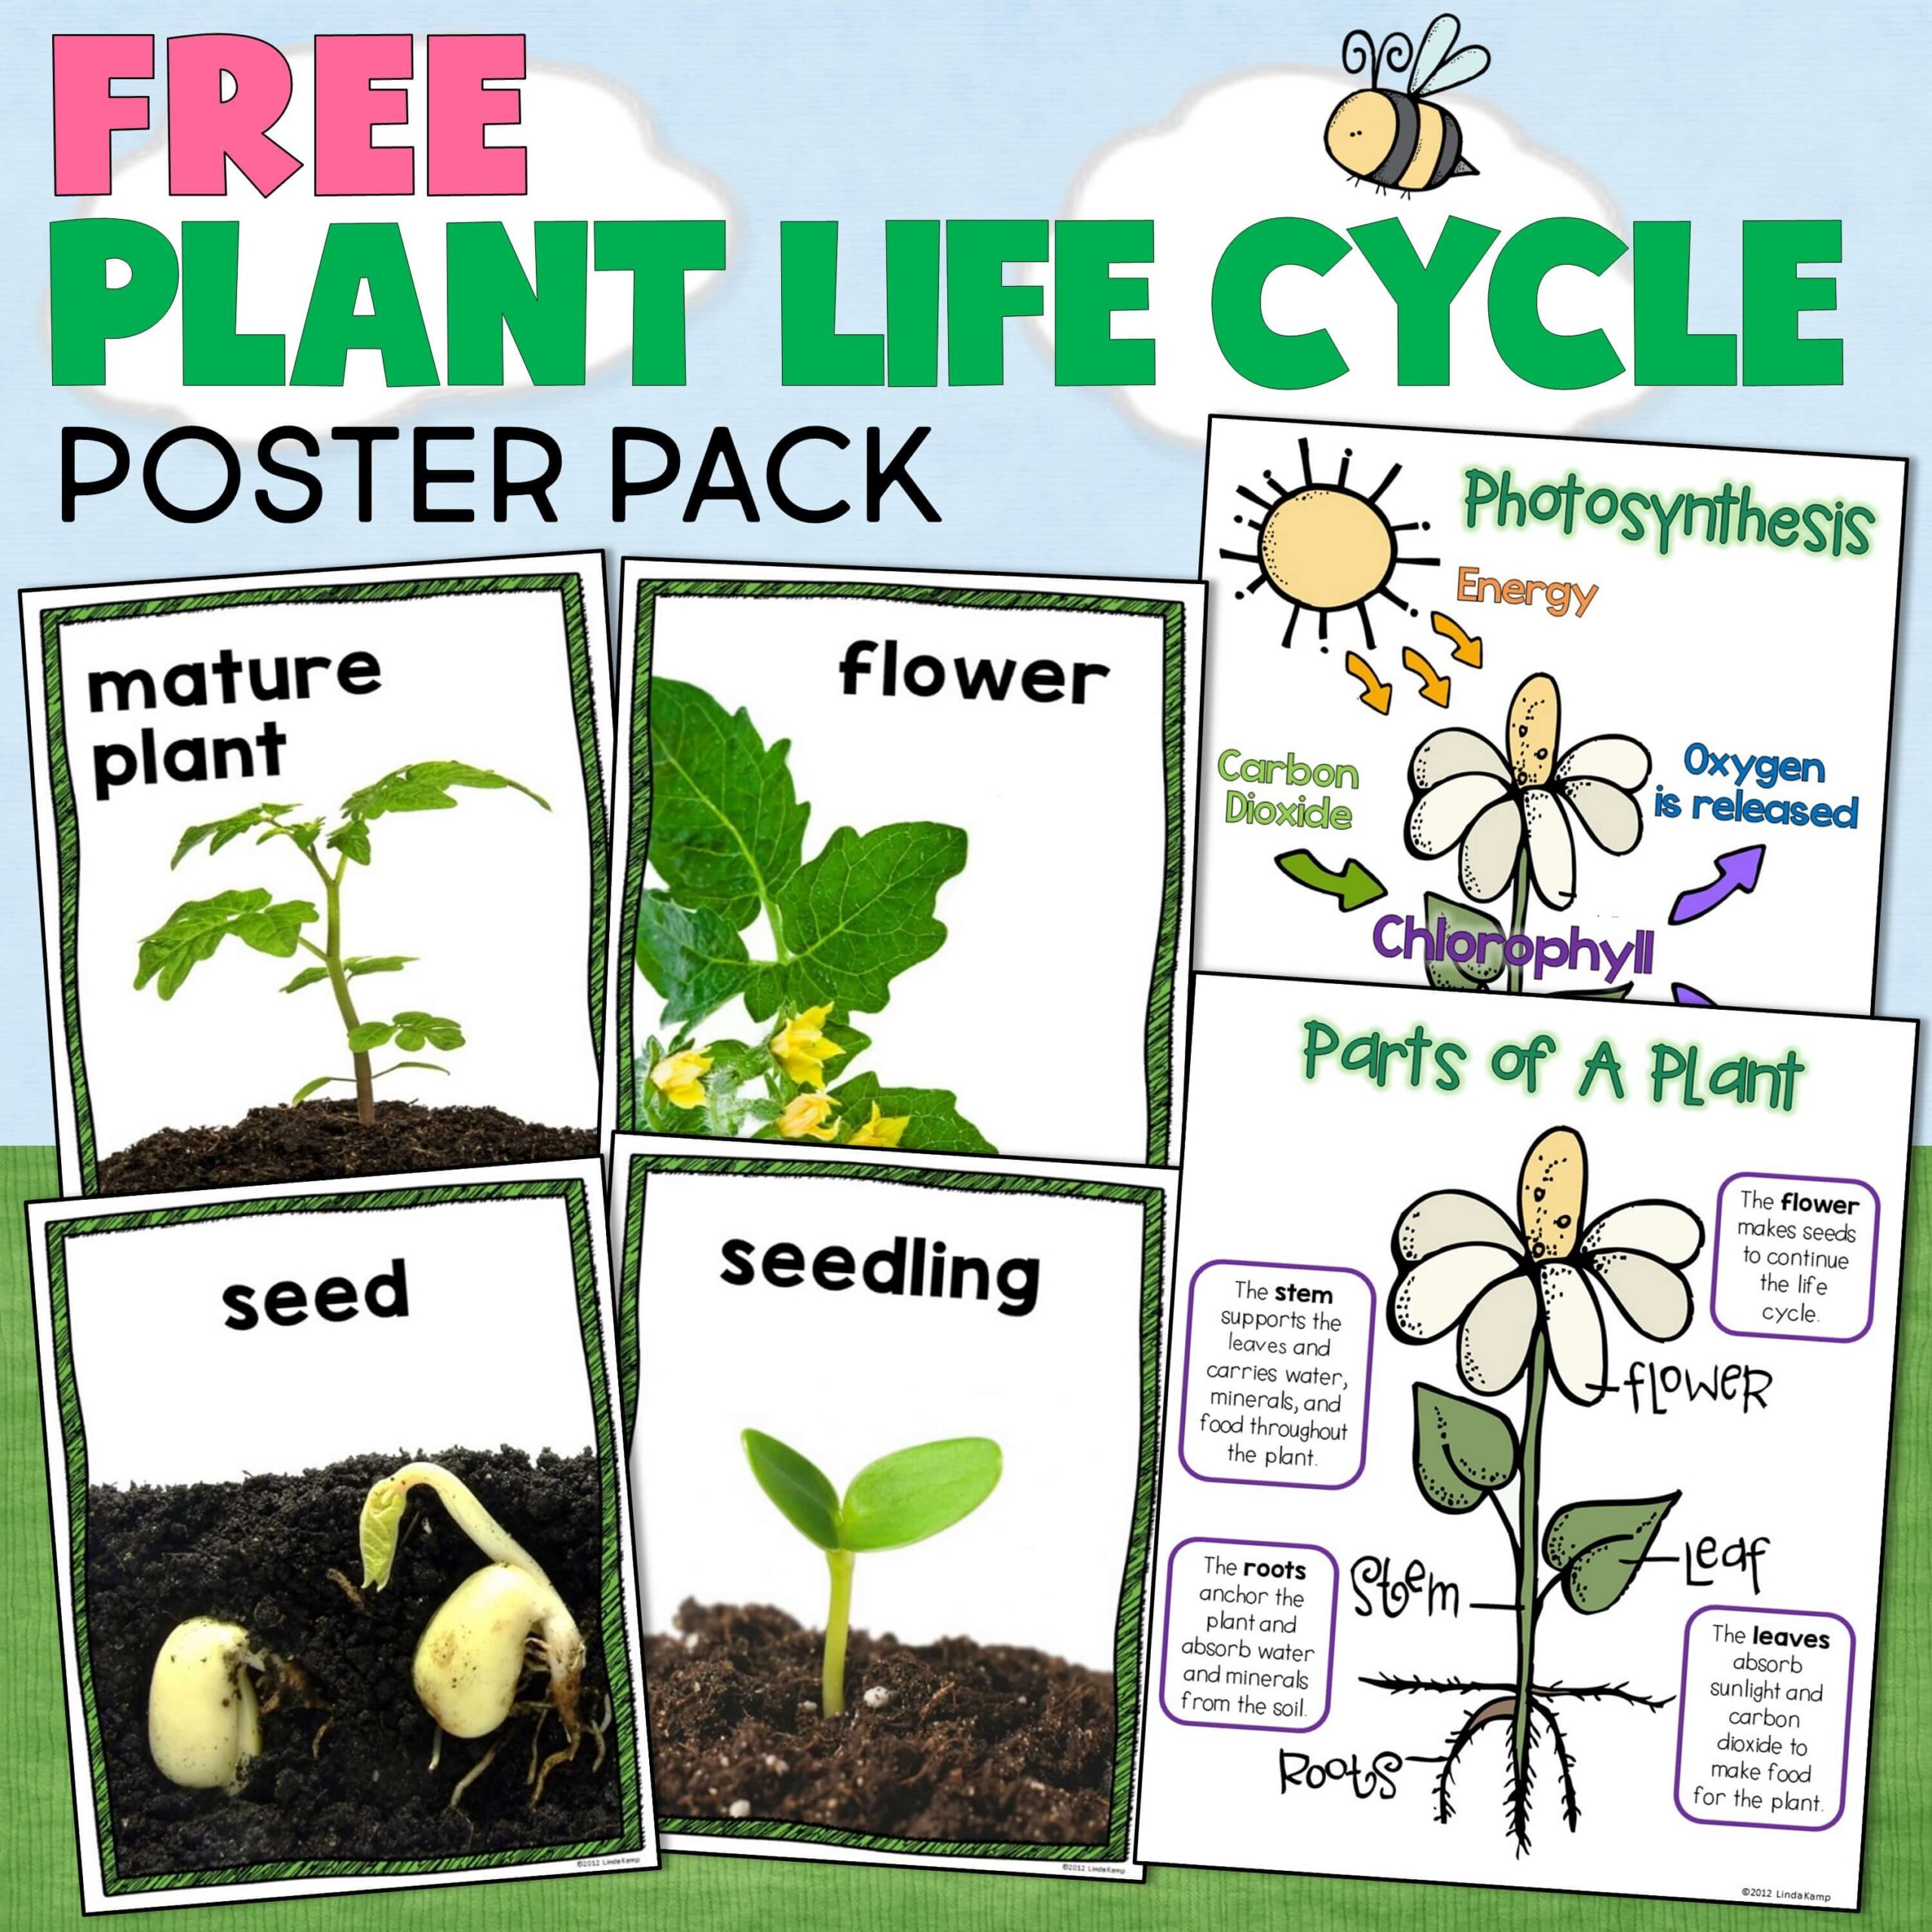 Free plant life cycle posters.